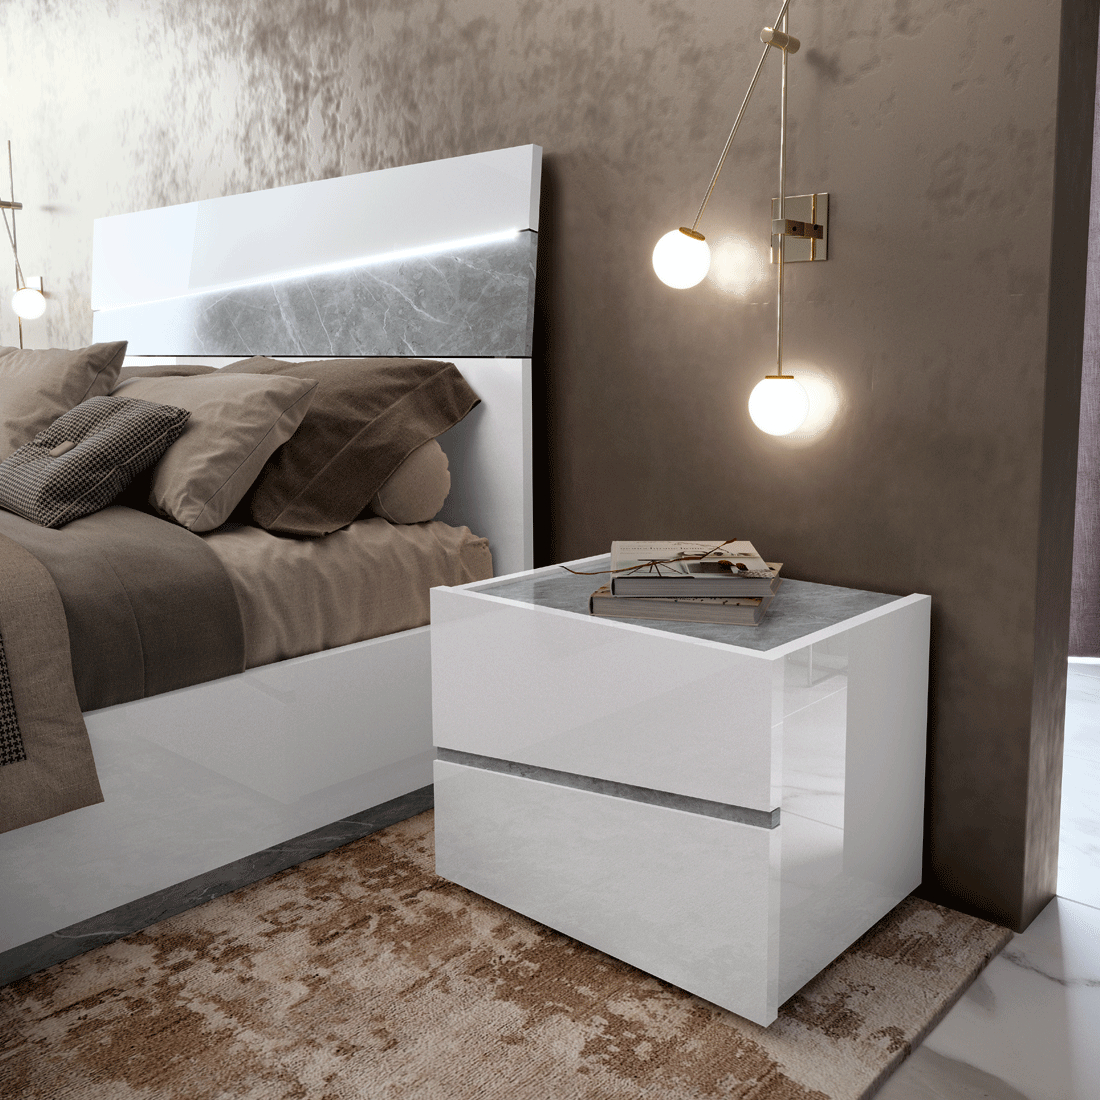 Made in Italy Quality Modern Contemporary Bedroom - Click Image to Close